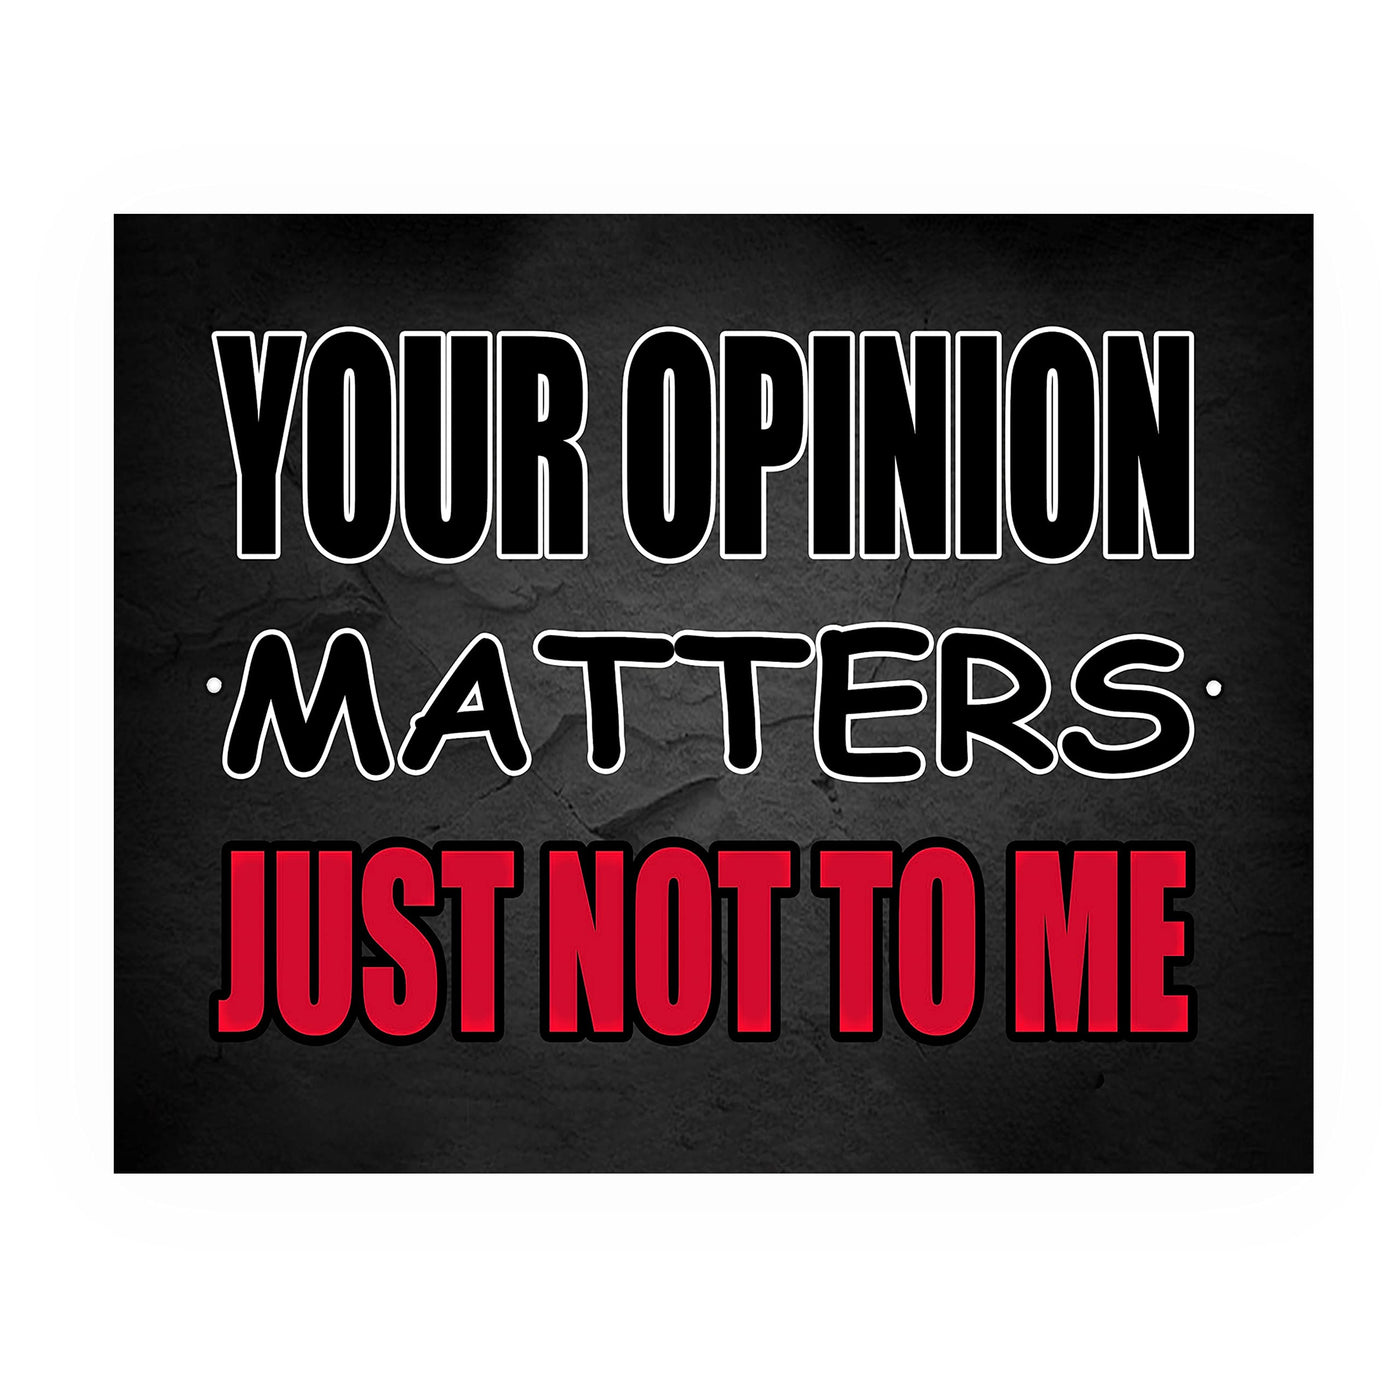 Your Opinion Matters-Just Not To Me Funny Sarcastic Wall Sign-10 x 8" Typographic Art Print-Ready to Frame. Humorous Decor for Home-Office-Bar-Shop-Cave. Fun Desk-Cubicle Sign! Great Novelty Gift!